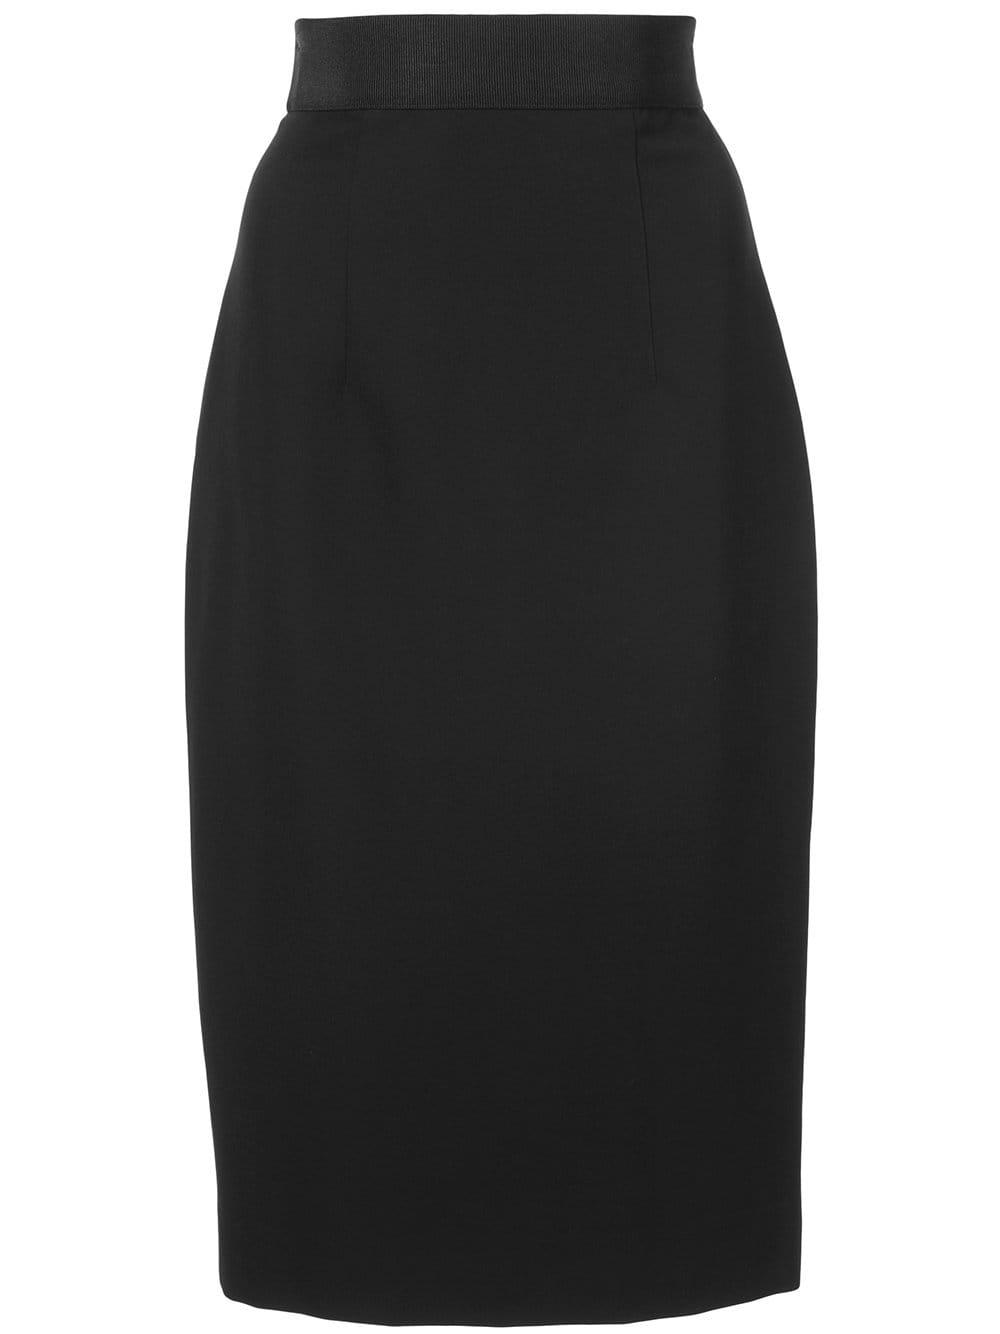 MILLY Synthetic Classic Pencil Skirt in Black - Lyst